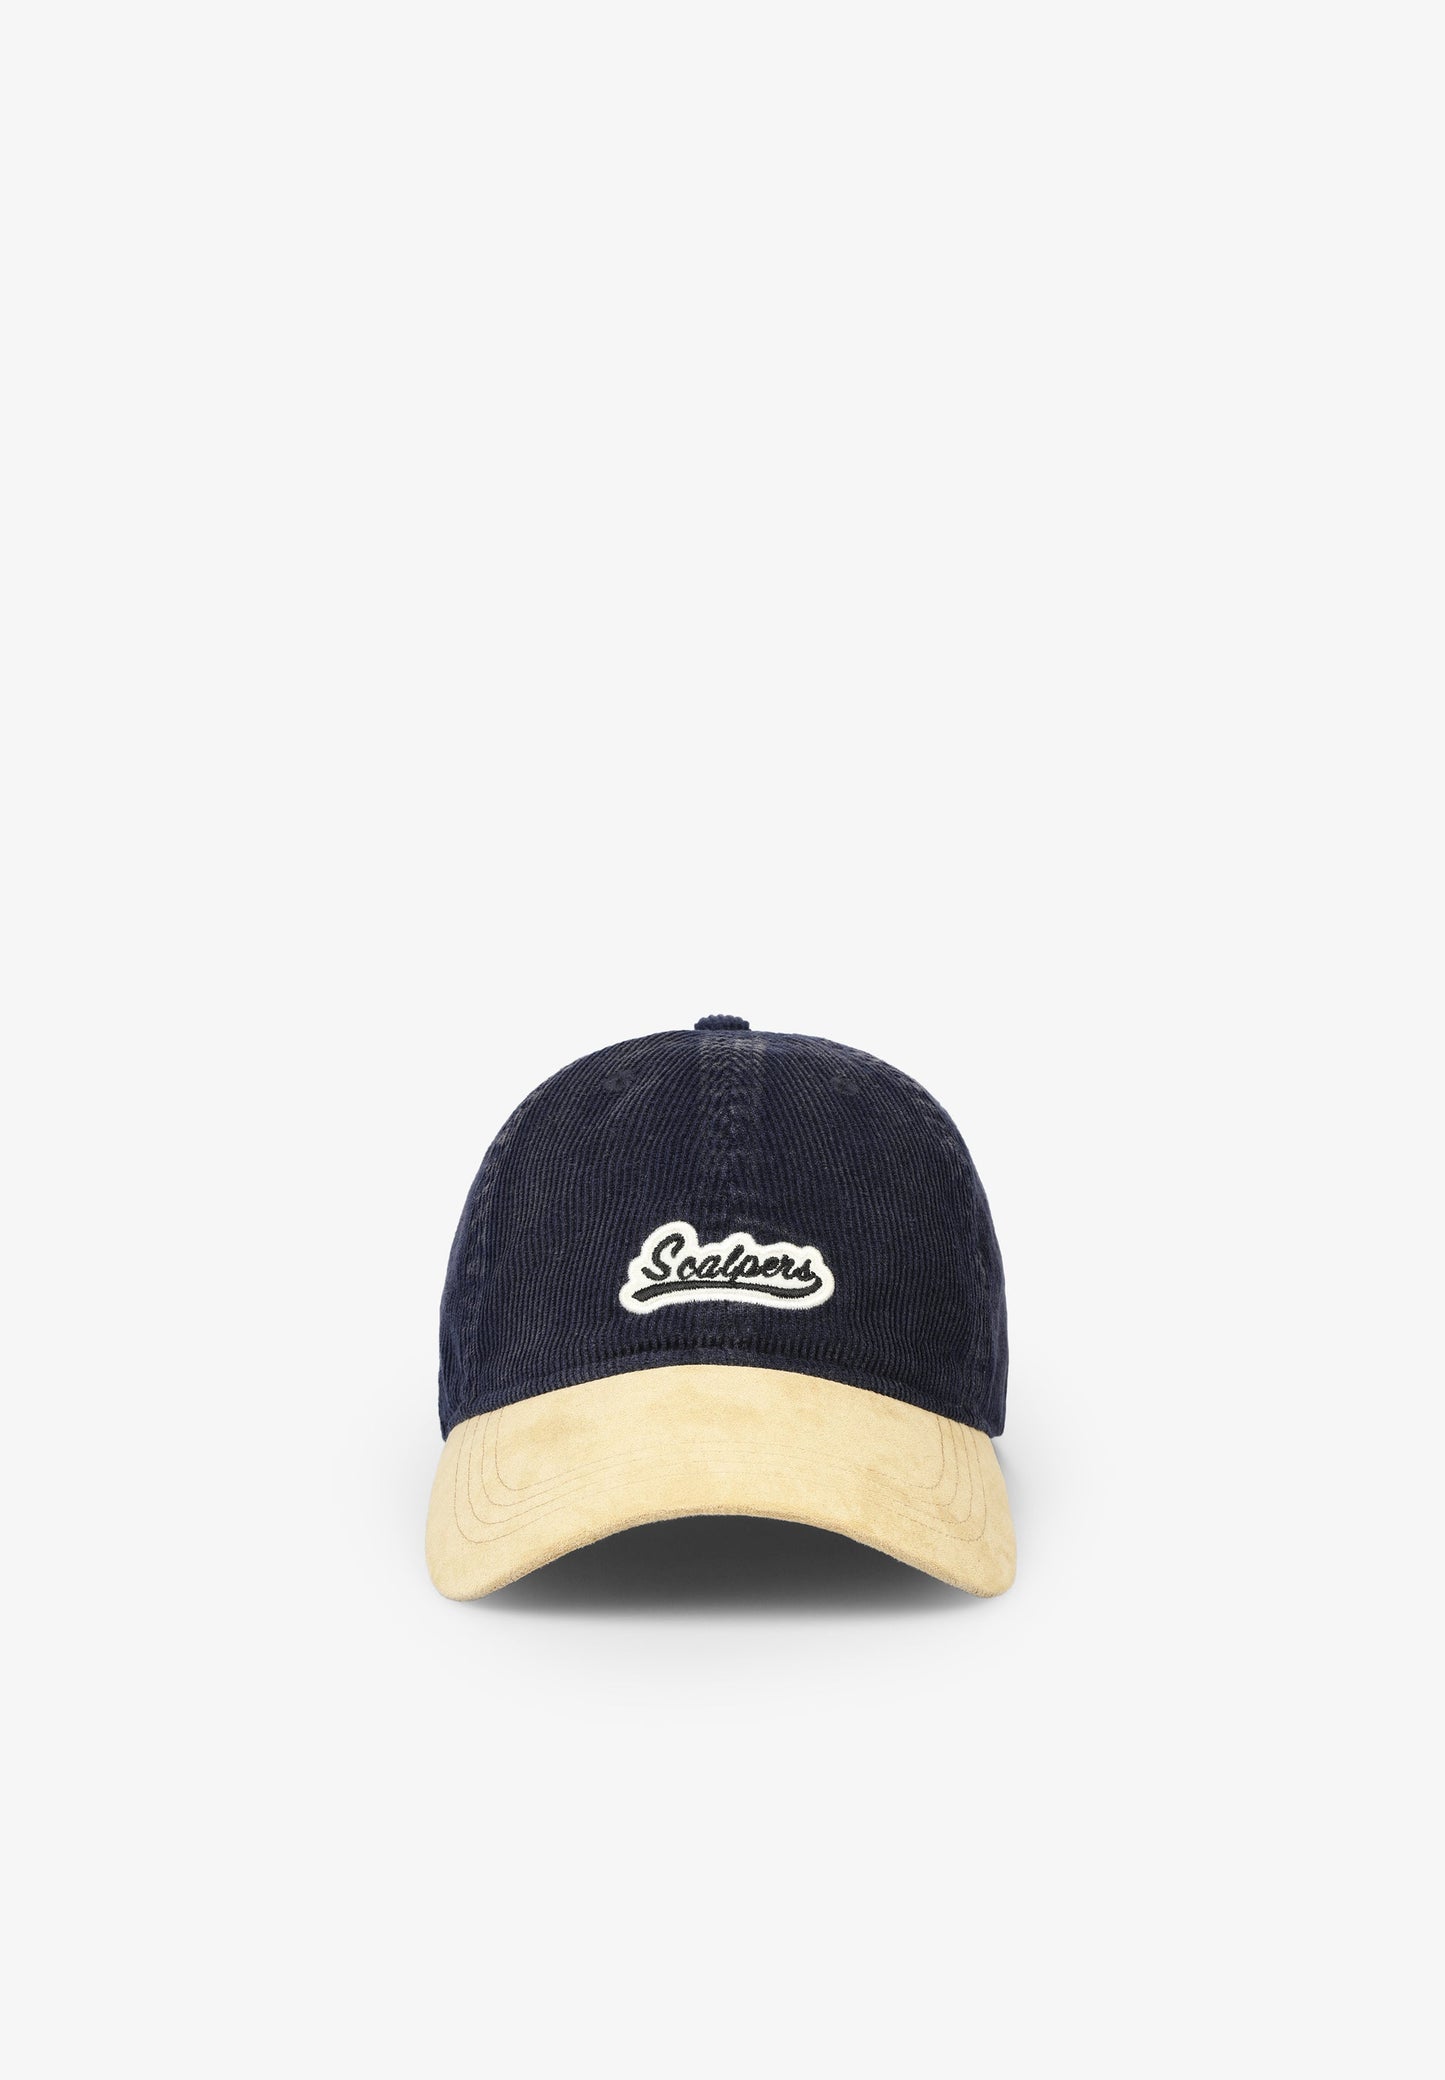 SOFT TOUCH CAP WITH LOGO